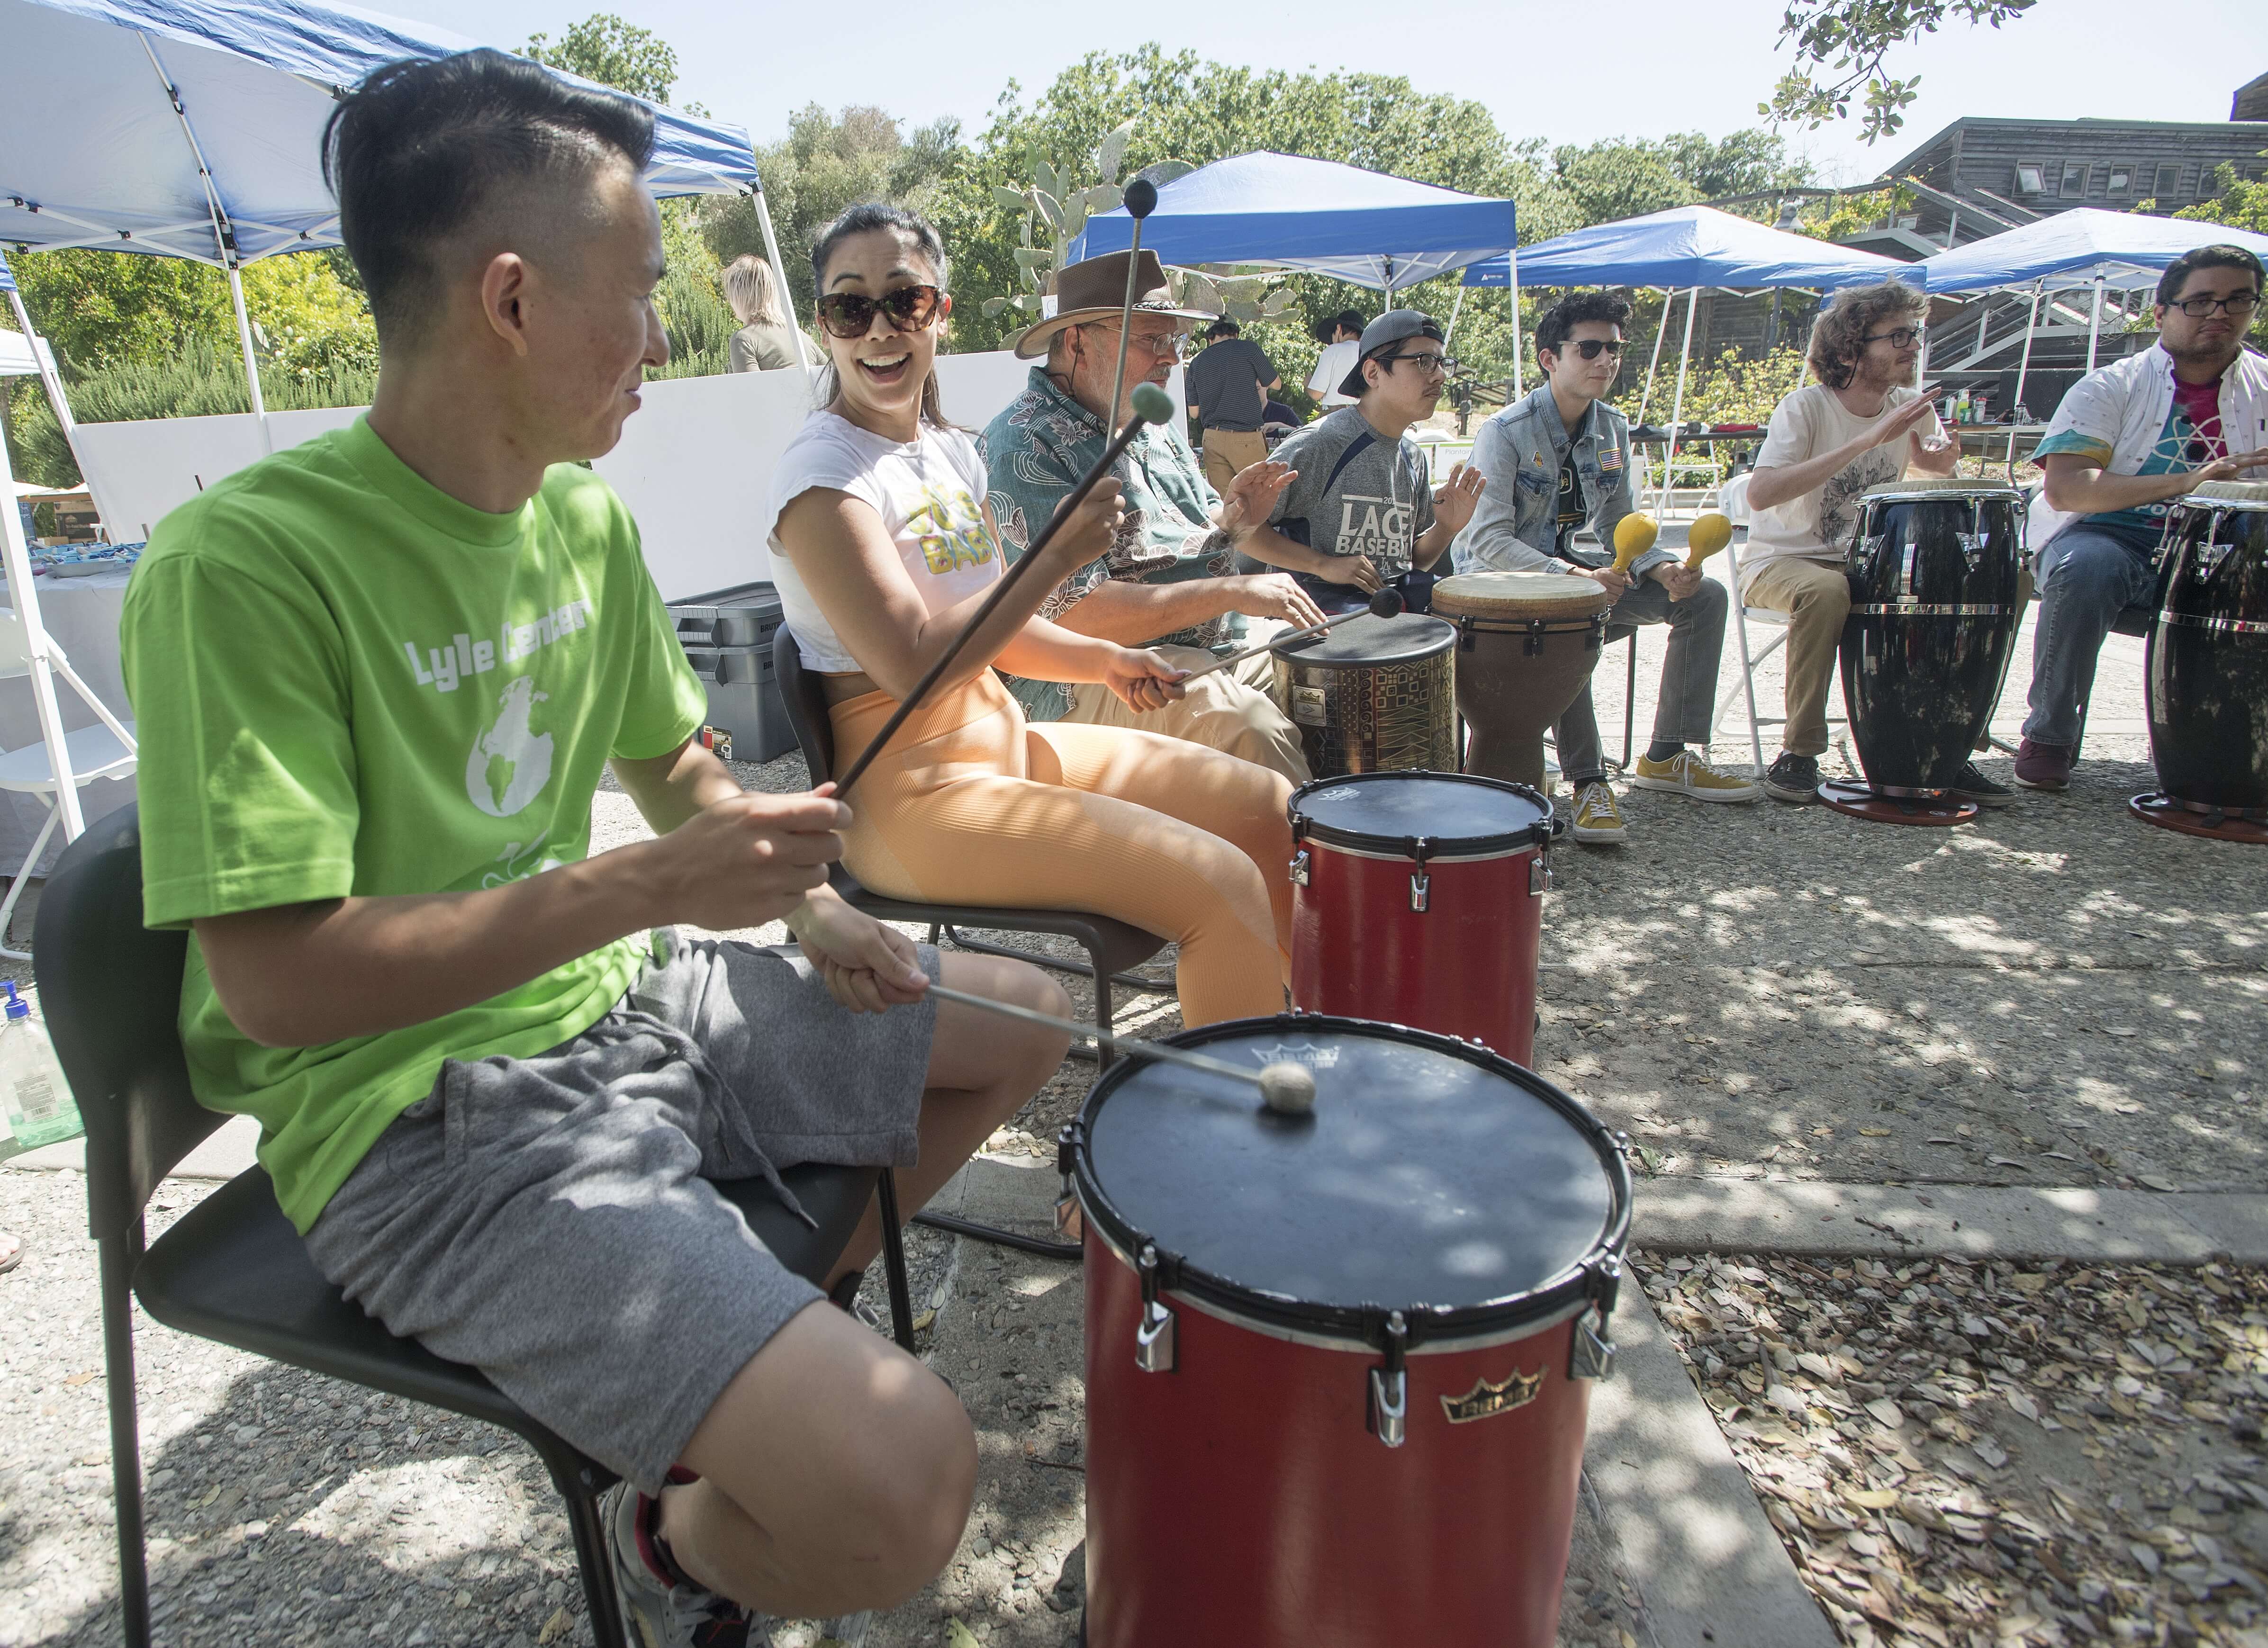 People sat around a circle playing drums outdoors